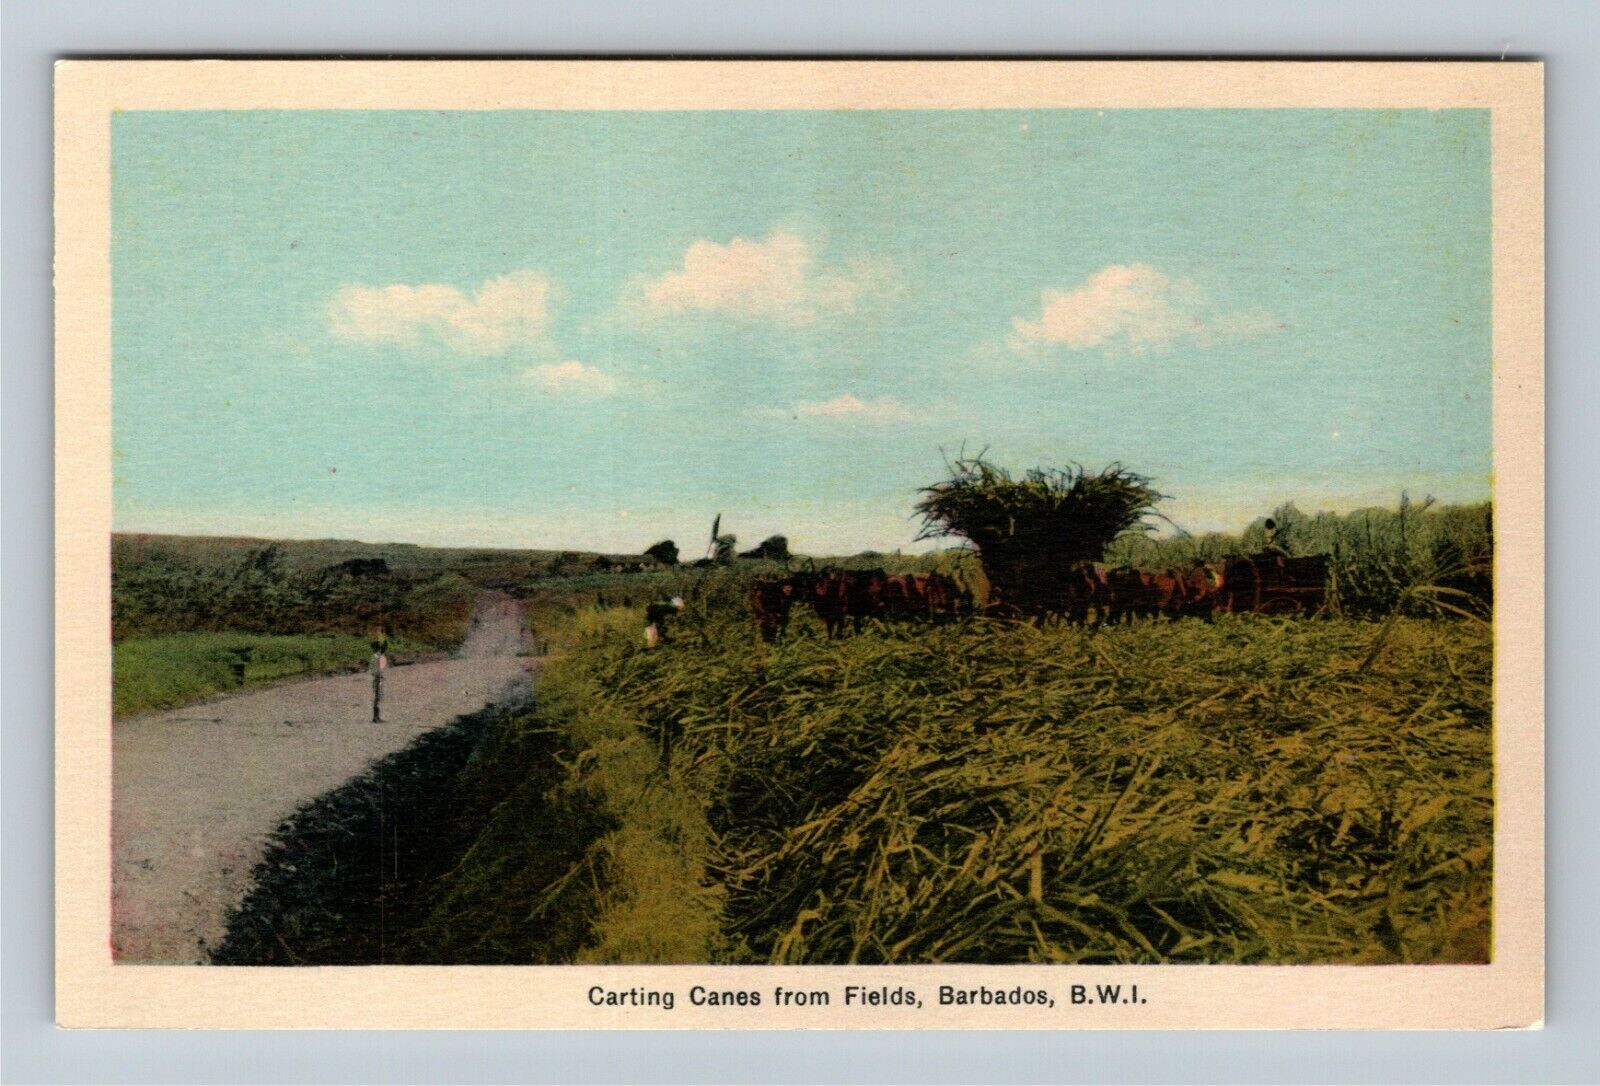 Barbados British West Indies, Carting Canes From Fields Vintage Postcard